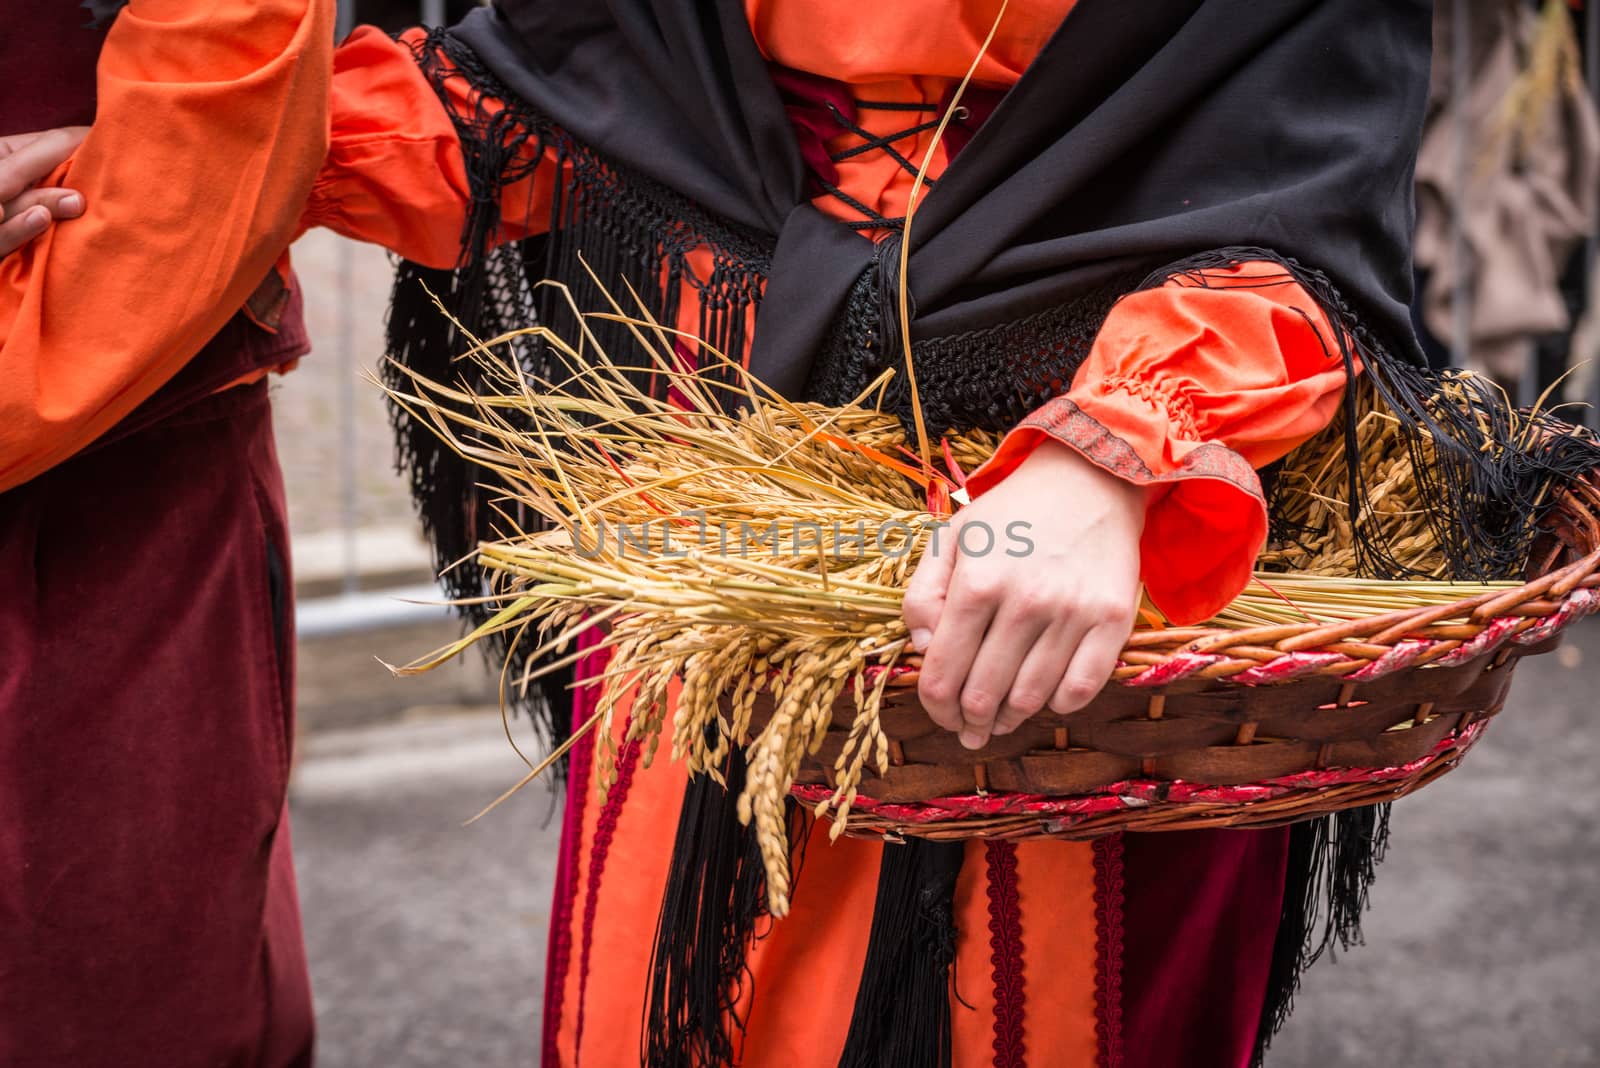 Each year in the city of Lacchiarella is the festival of the goose where local farmers are dressed with traditional clothes and parade through the streets of the city